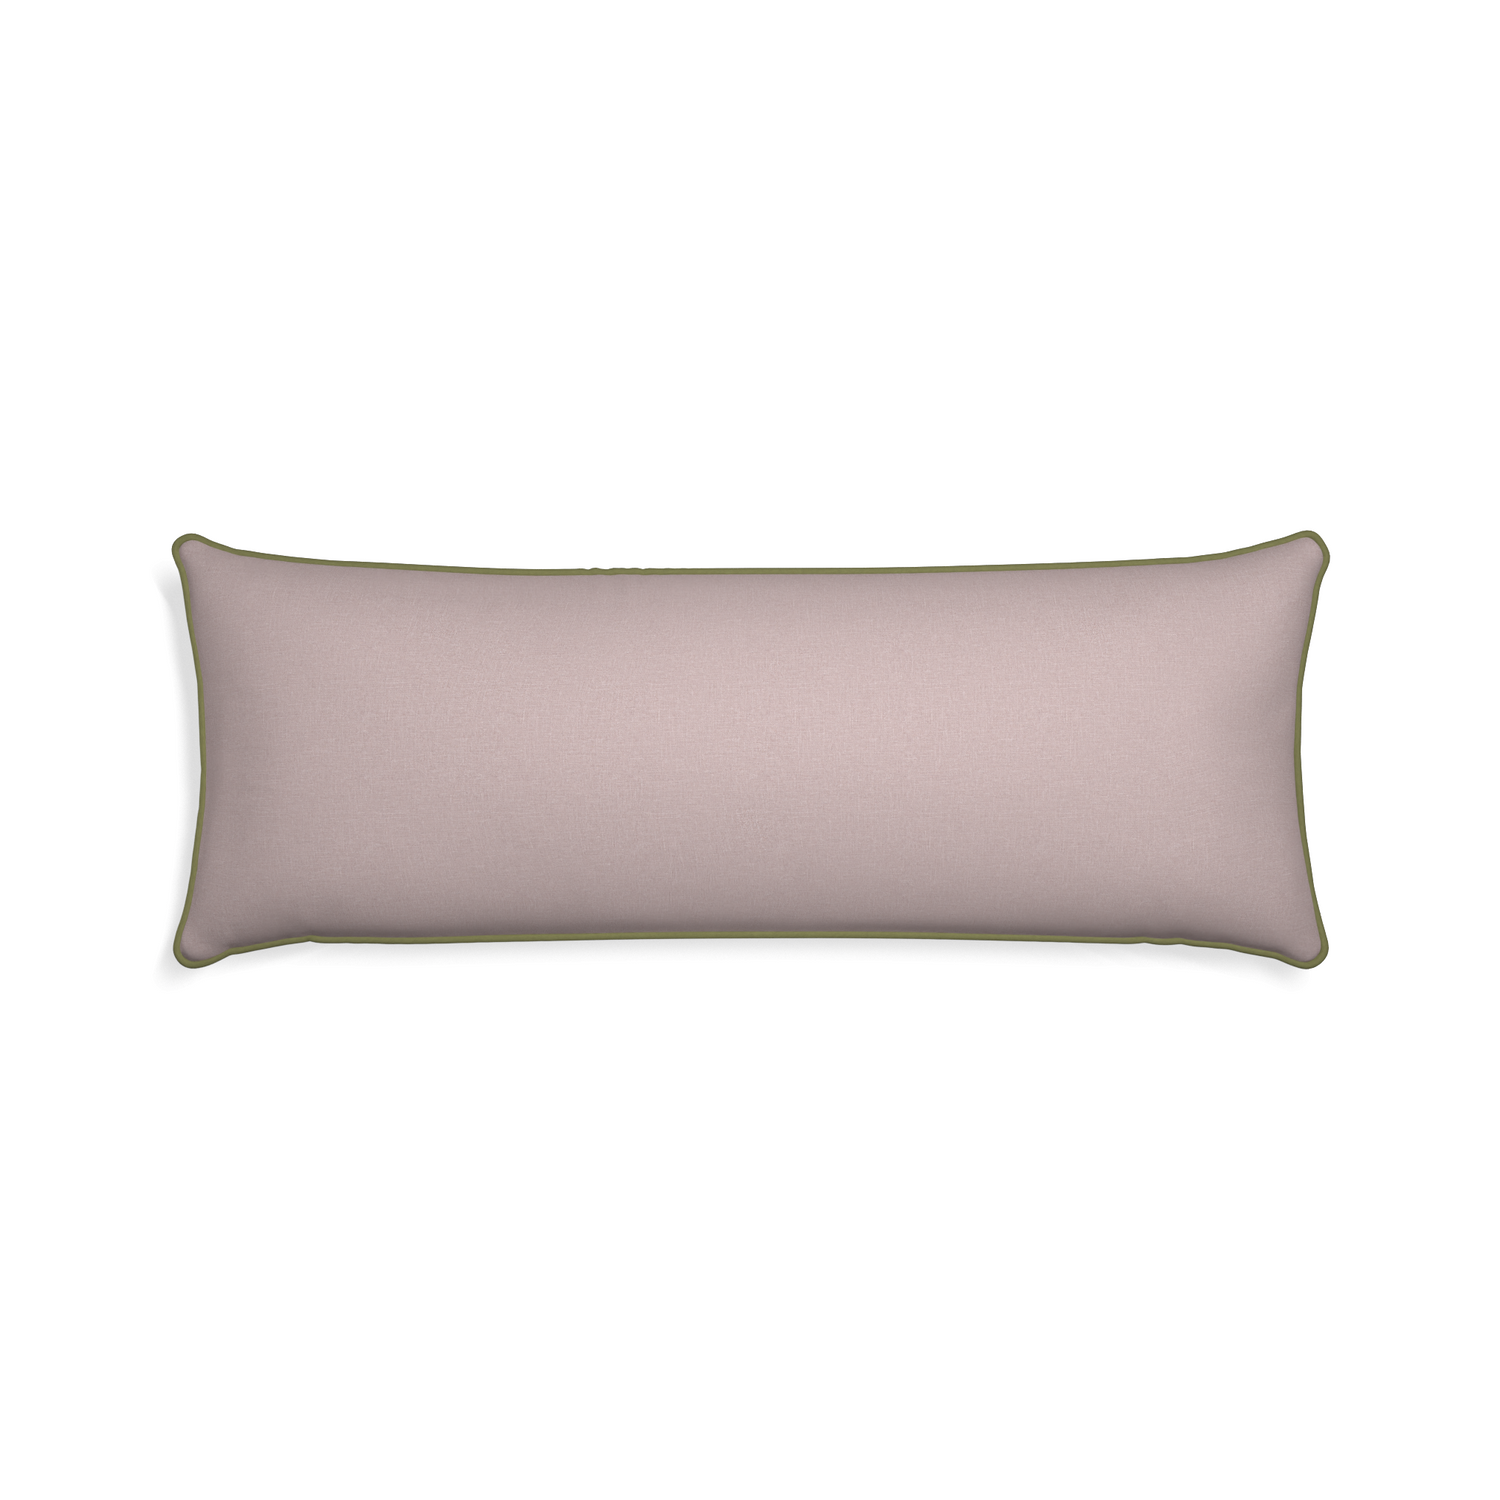 Xl-lumbar orchid custom mauve pinkpillow with moss piping on white background